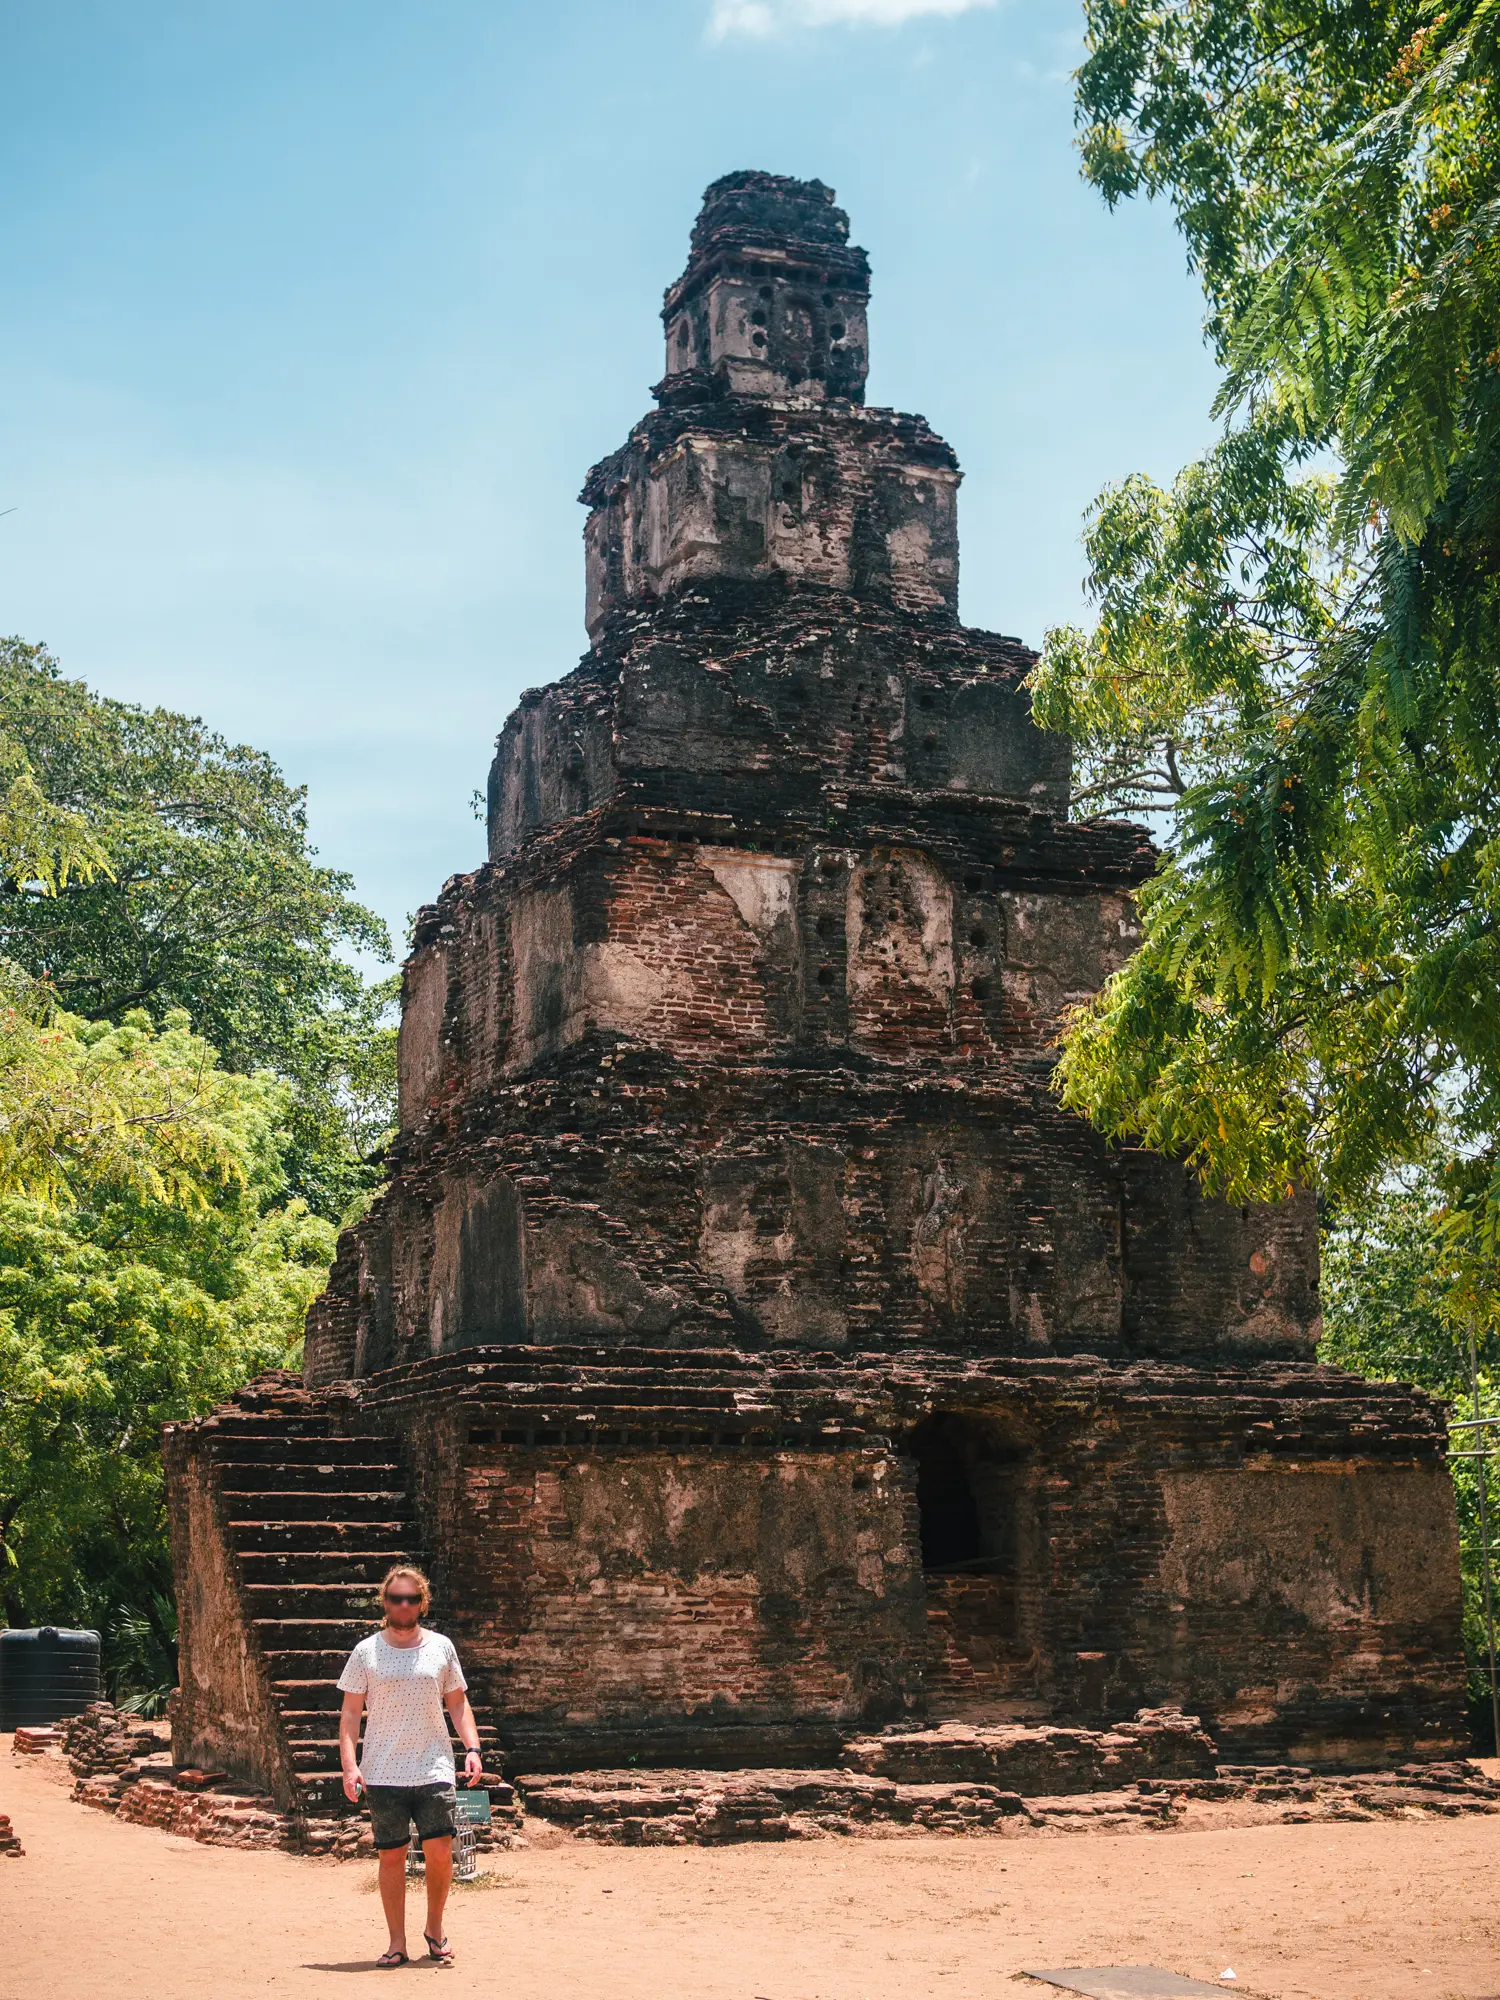 Man wearing a white t-shirt walking in front of a brick pyramid ruin with six layers, in Polonnaruwa.